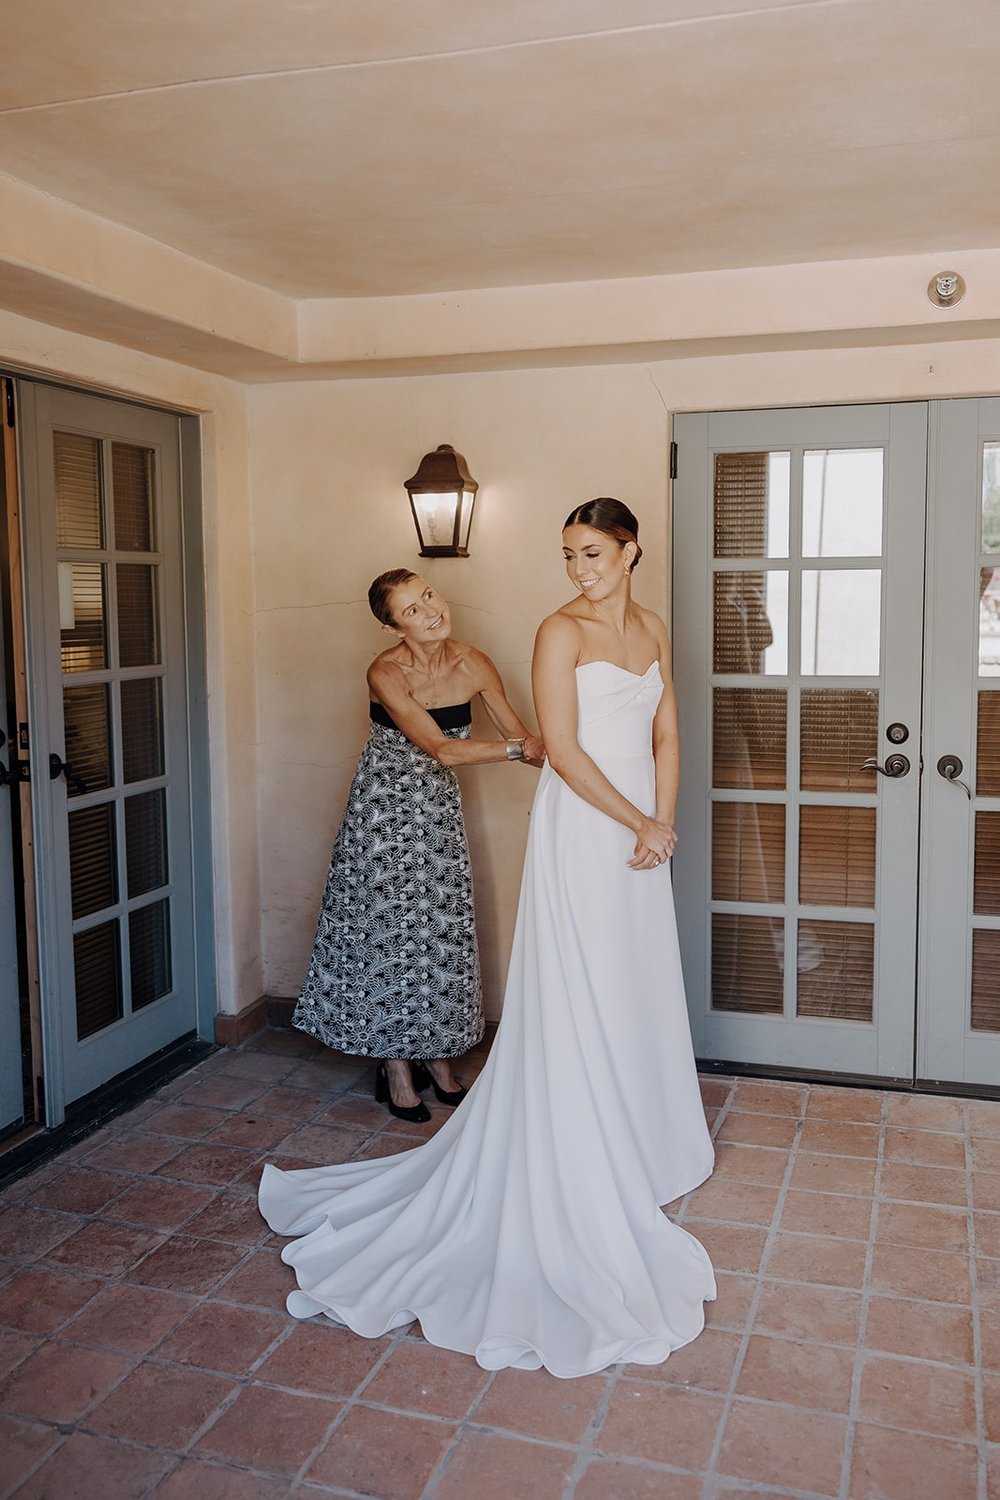 Bride gets helped into white wedding dress at Royal Palms Resort &amp; Spa